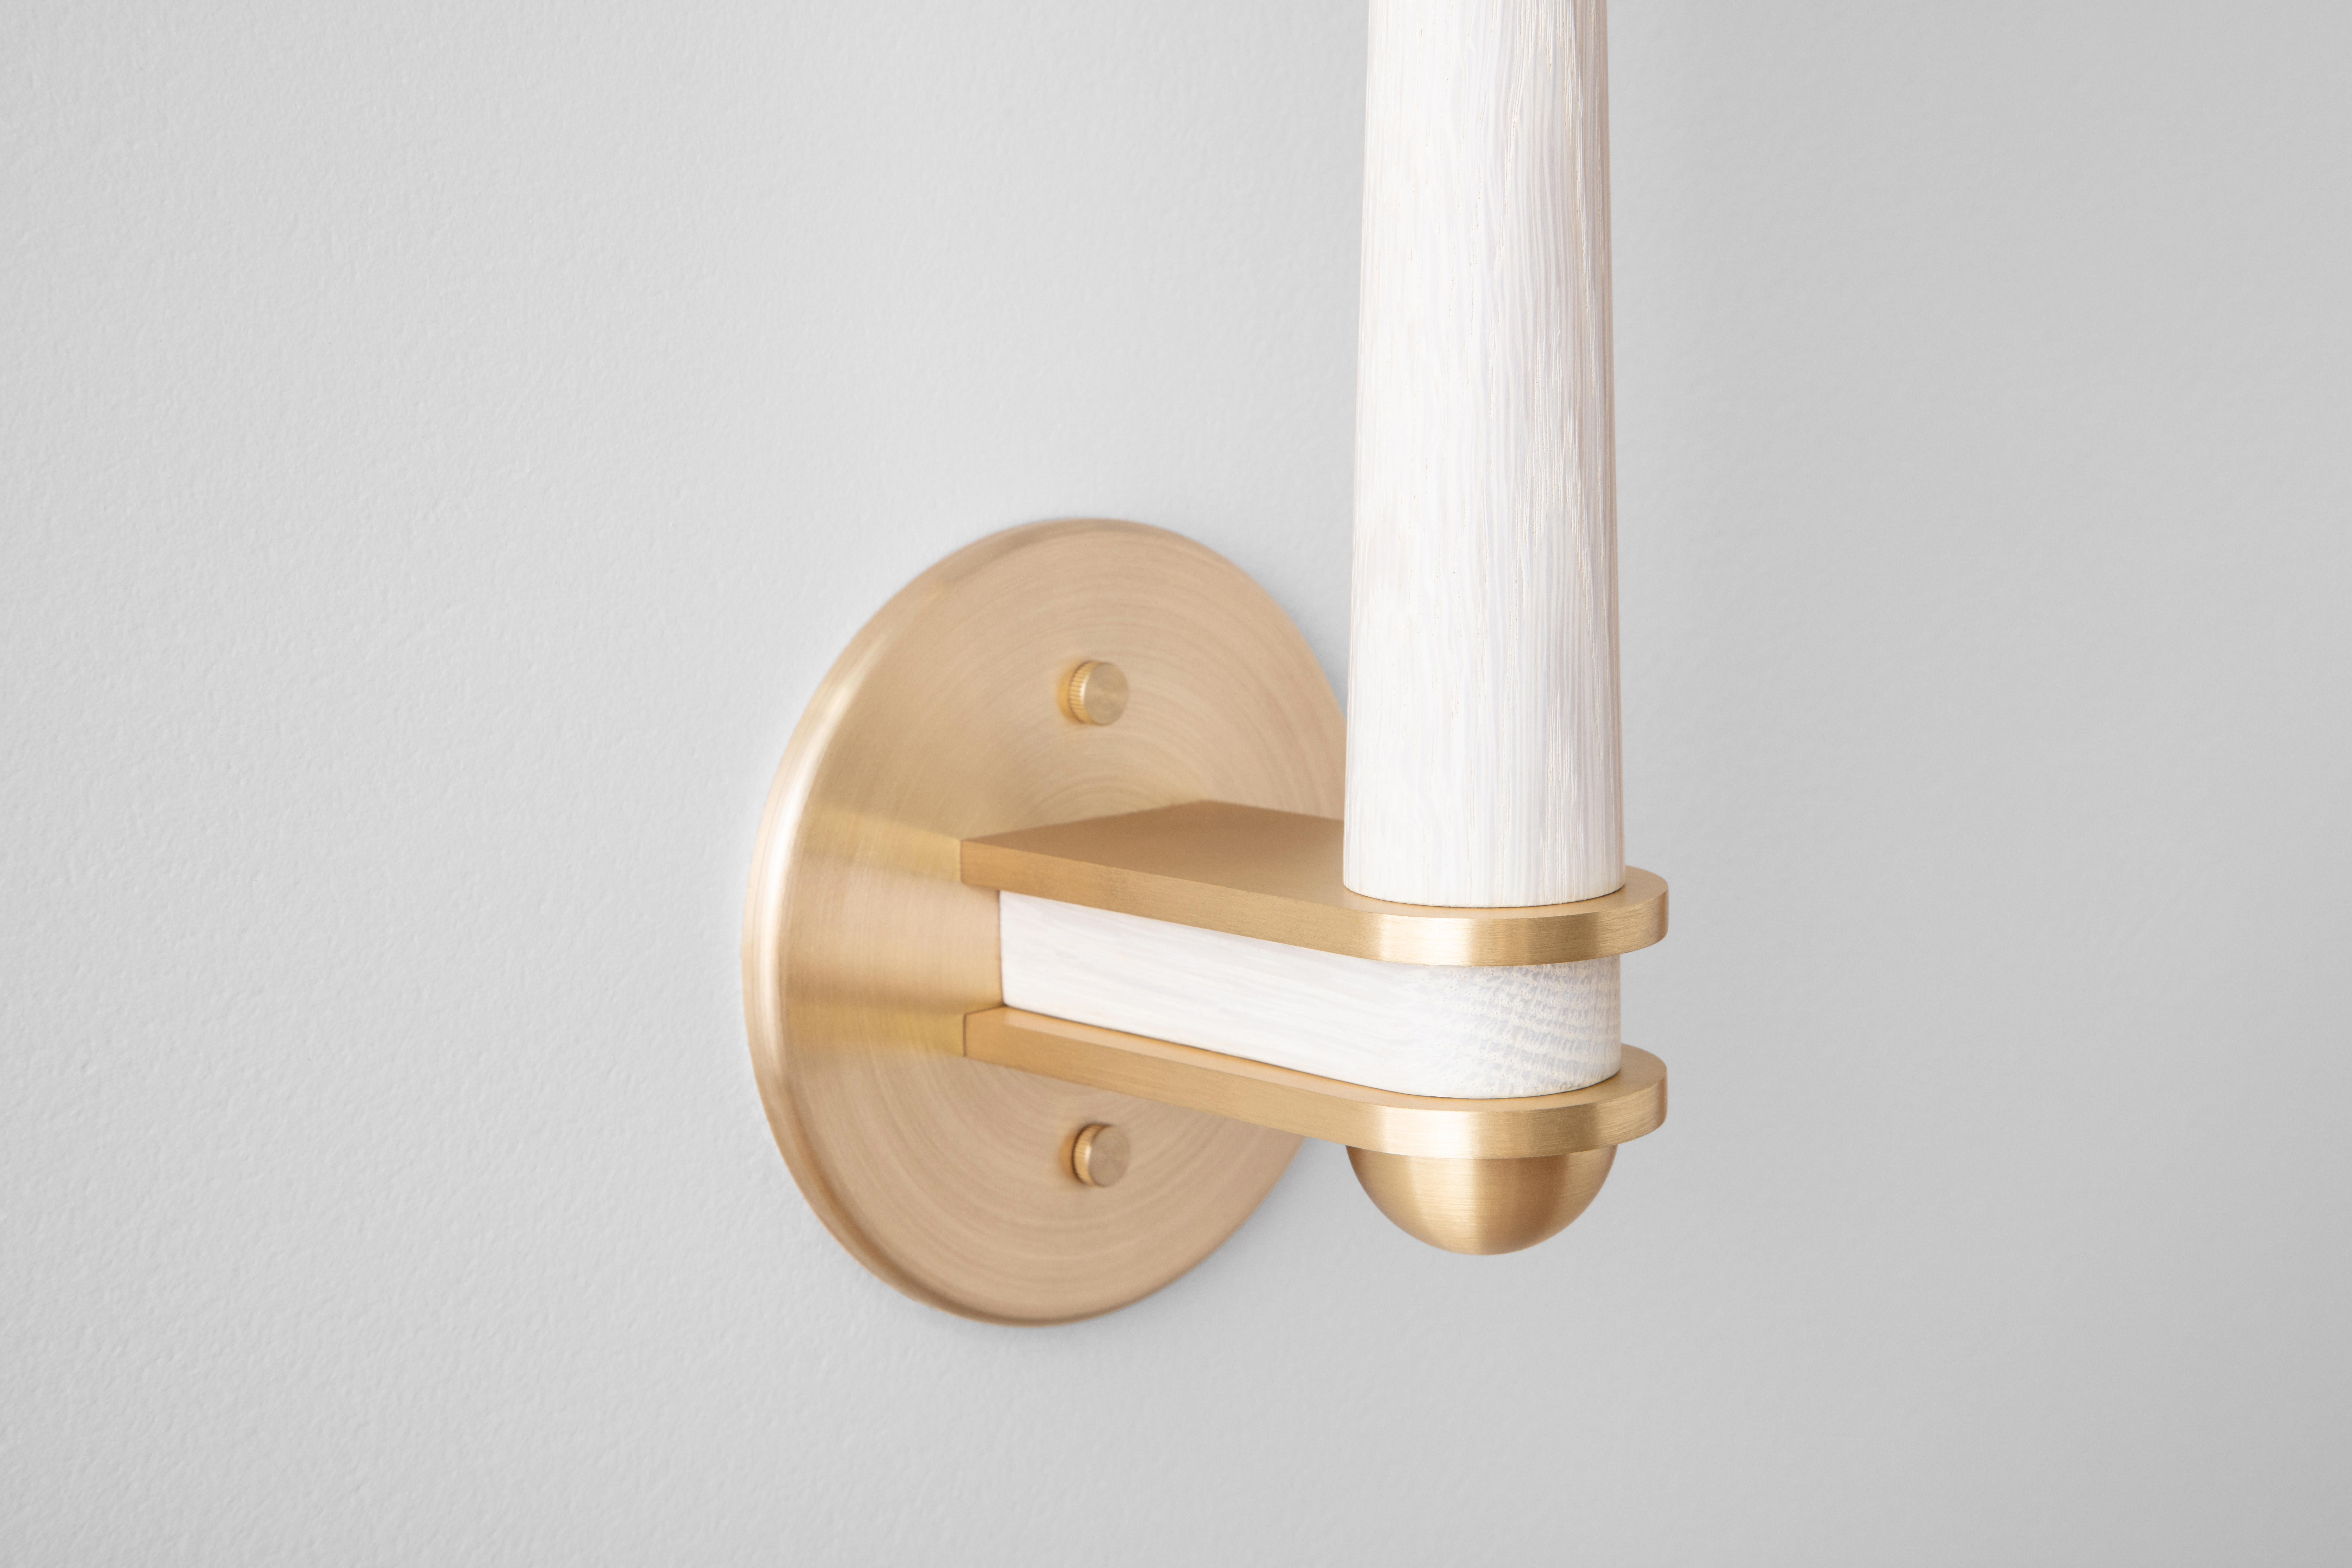 Giotto Sconce (Classic) in Oak and Brass Finishes by Matthew Fairbank In Excellent Condition For Sale In Brooklyn, NY